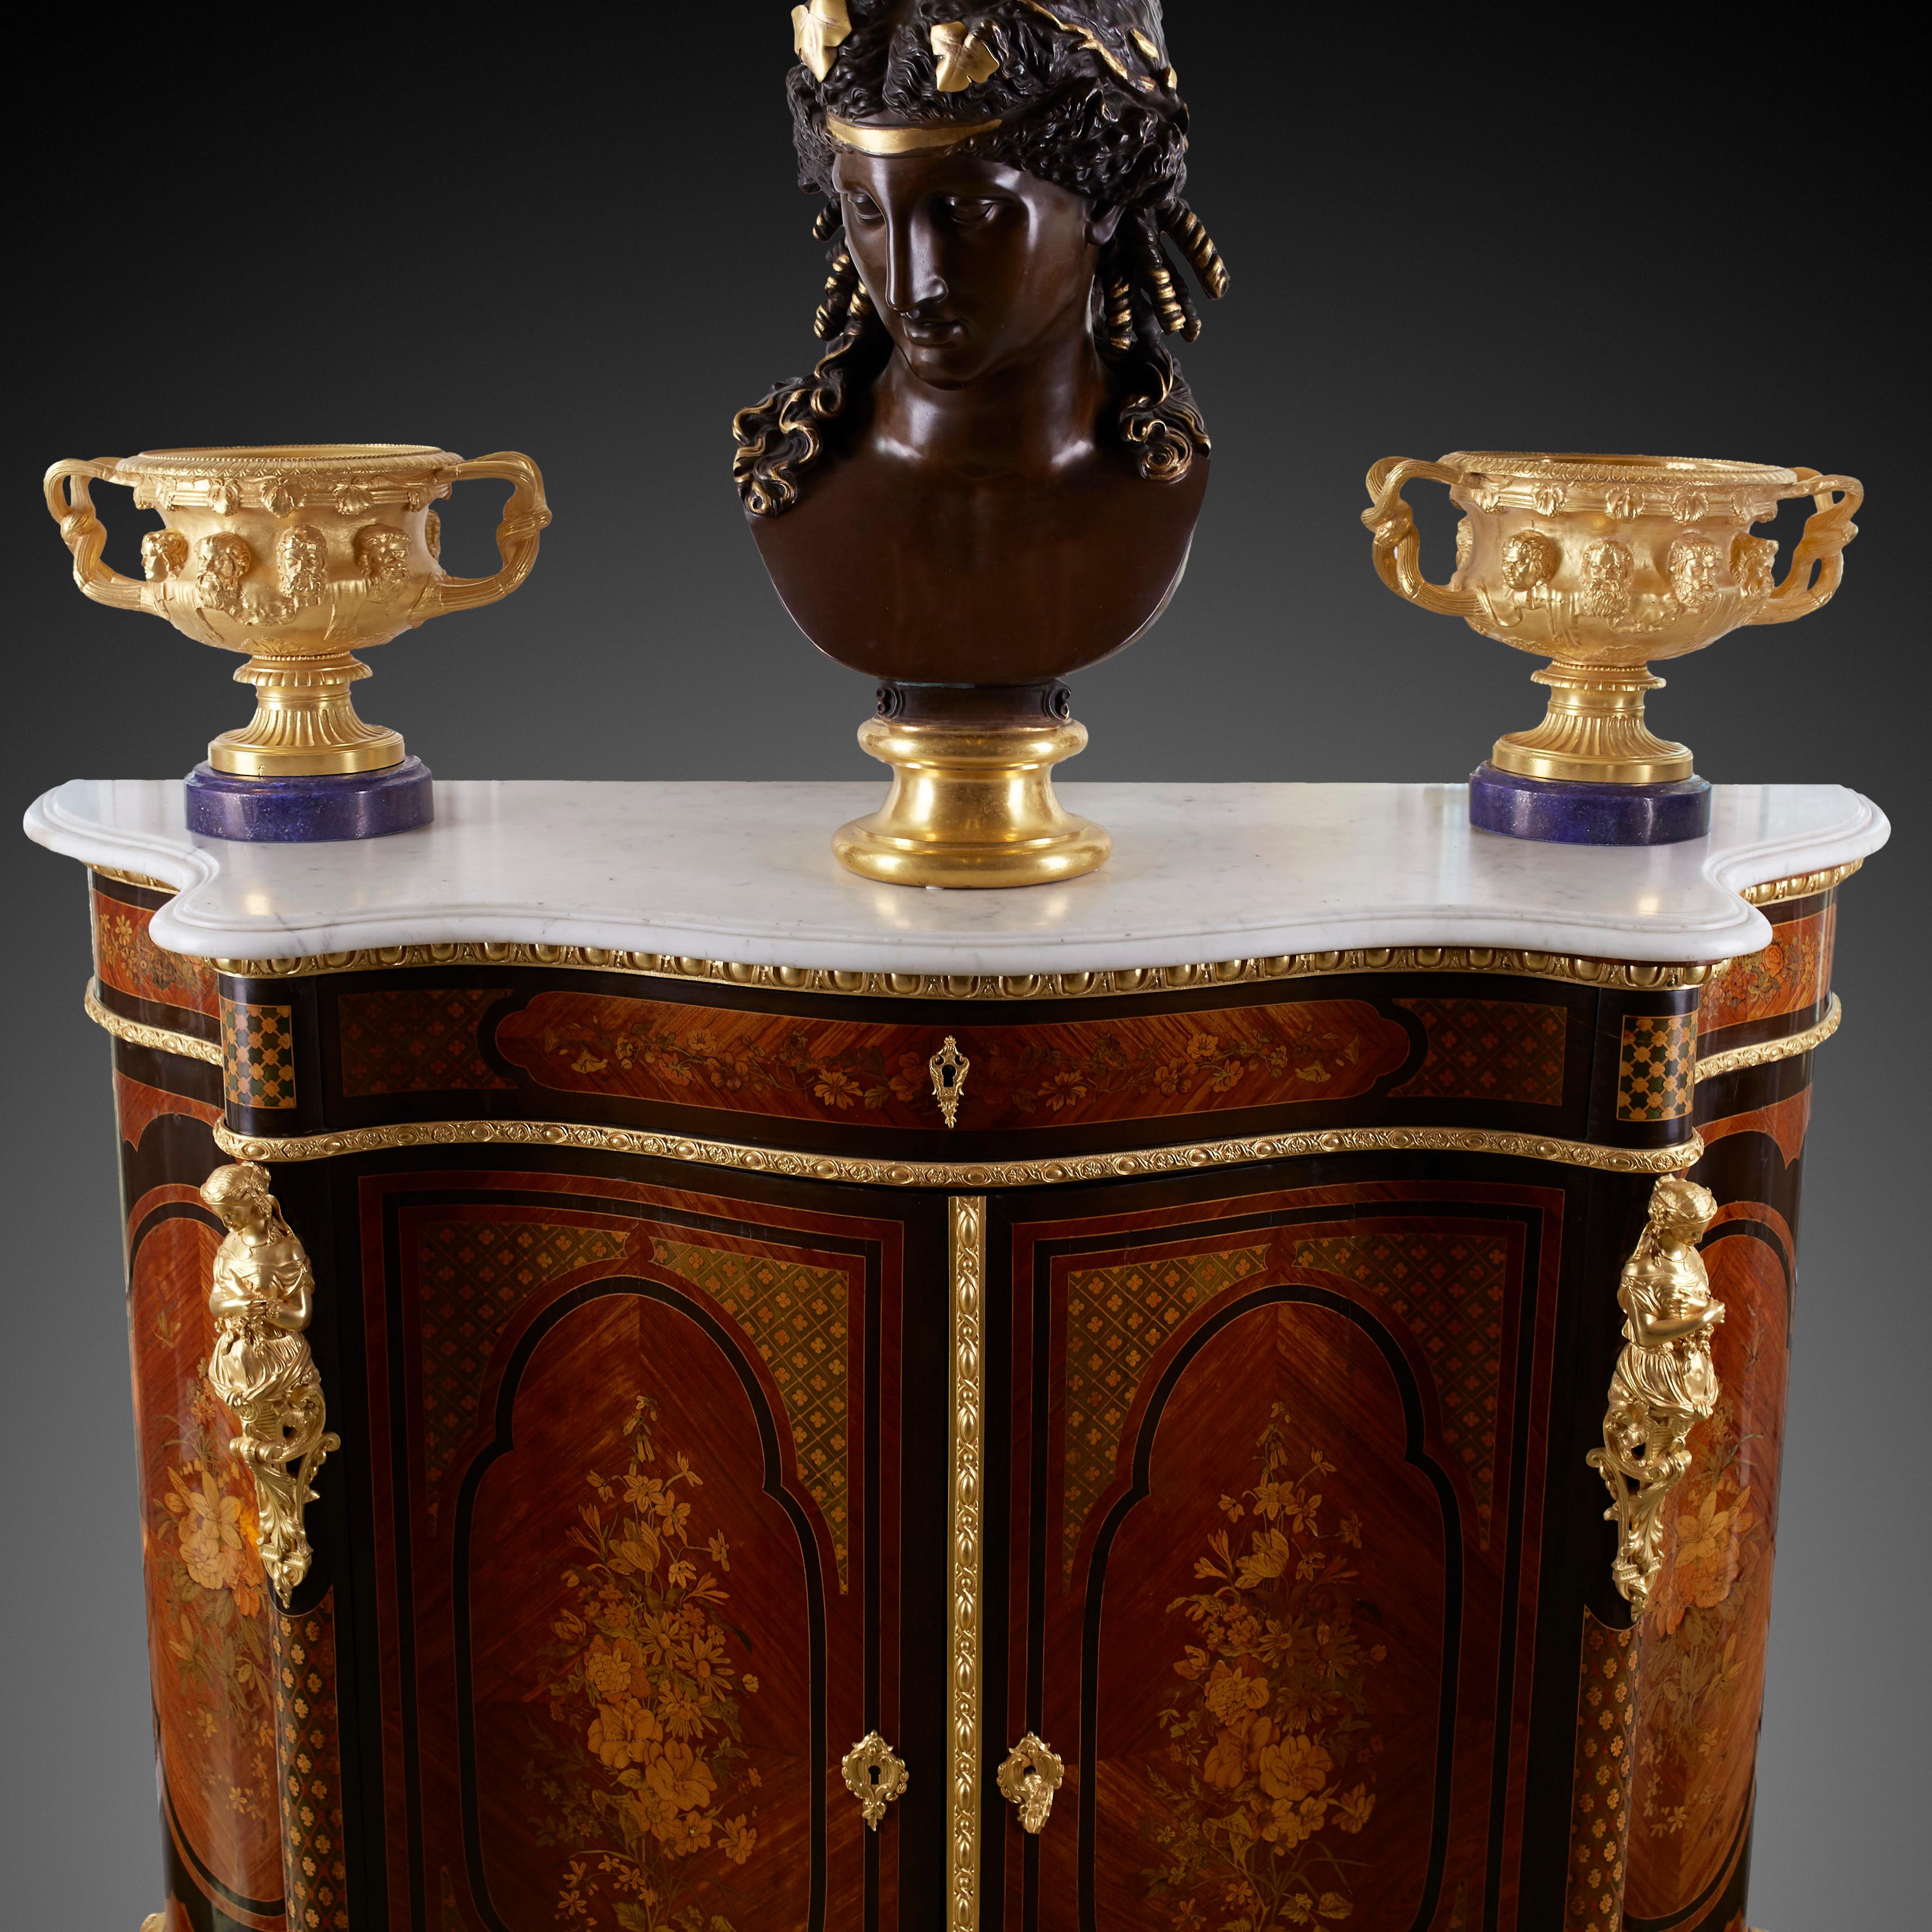 Napoleon III Alexander Roux Serpentine Inlaid Side Cabinet’ Uses Mainly Light Wood Materials For Sale